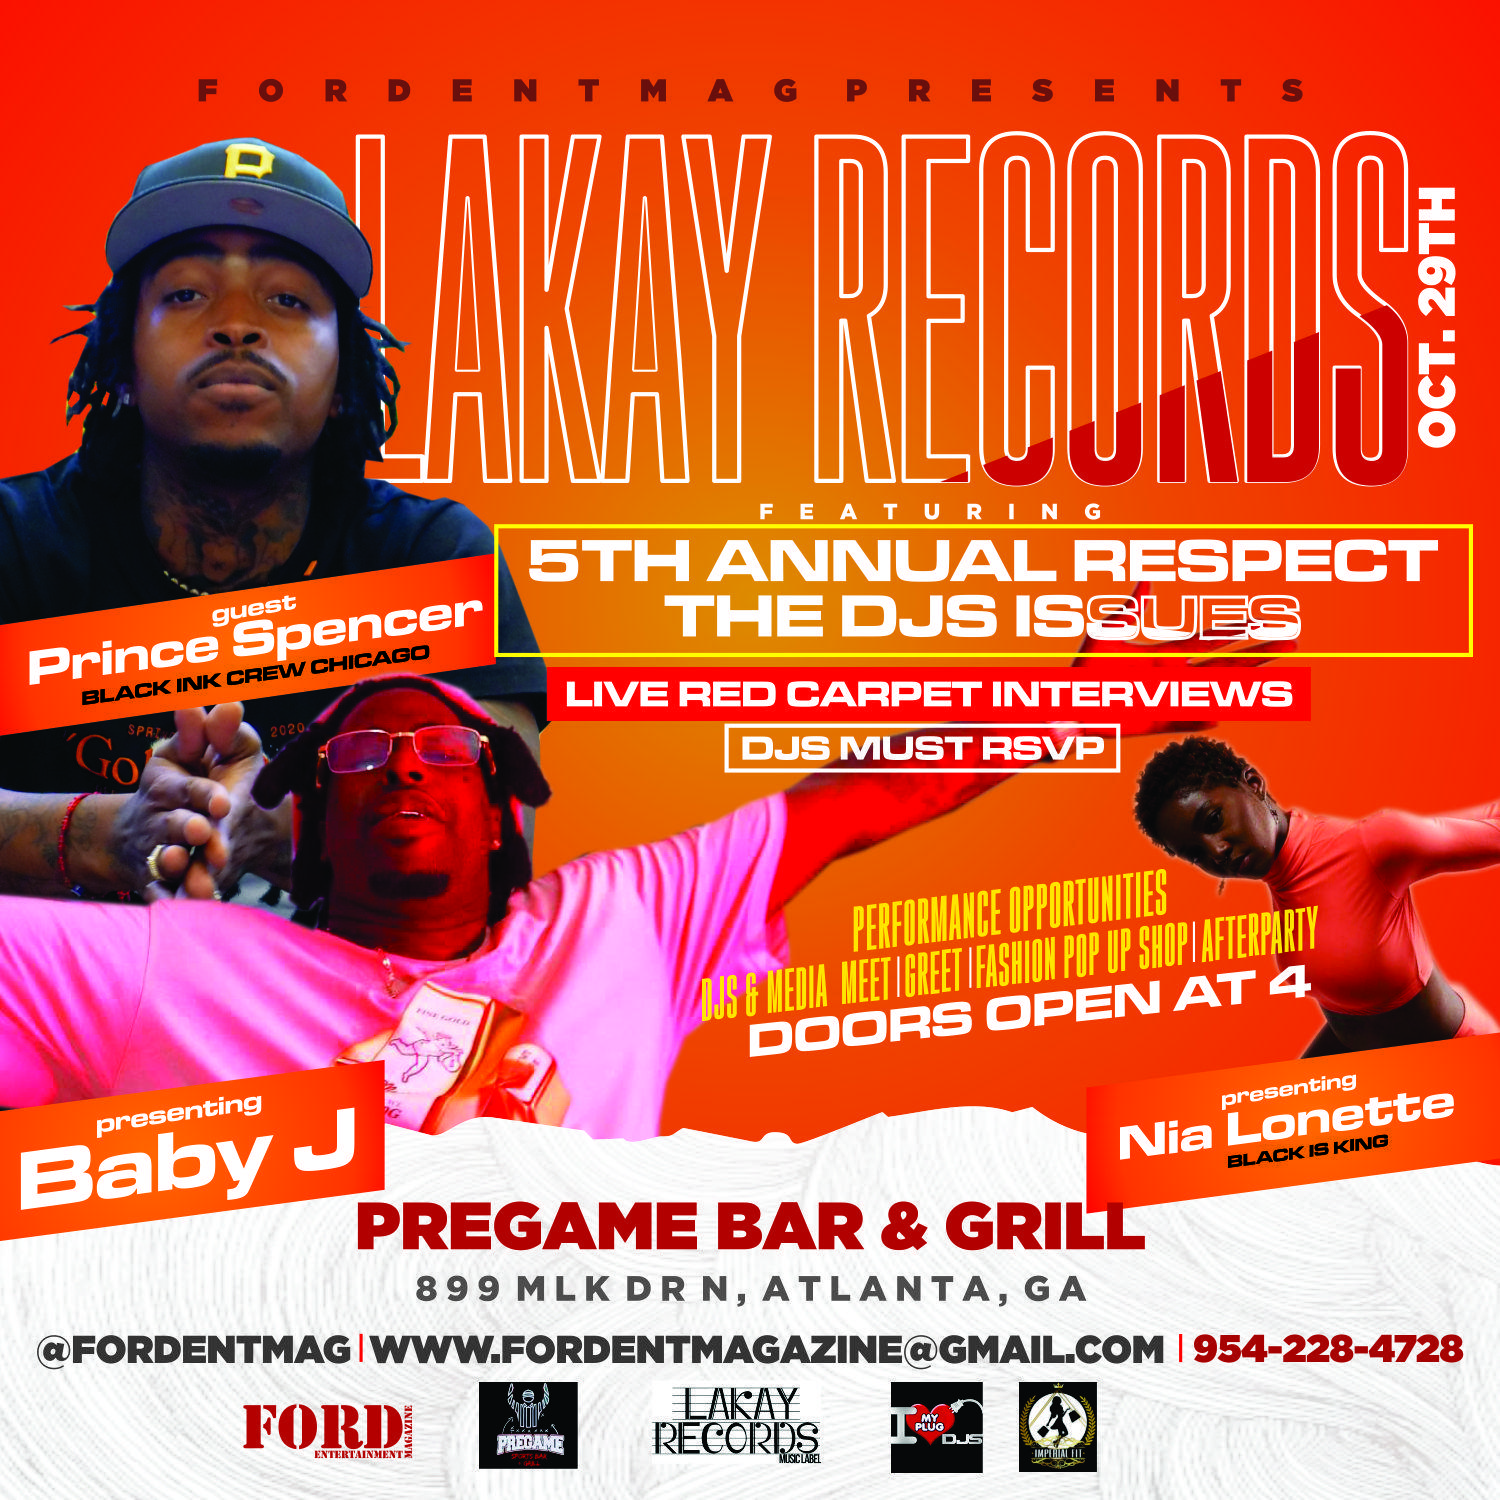 Ford Ent Mag presents Lakay Records Launch & Media Party